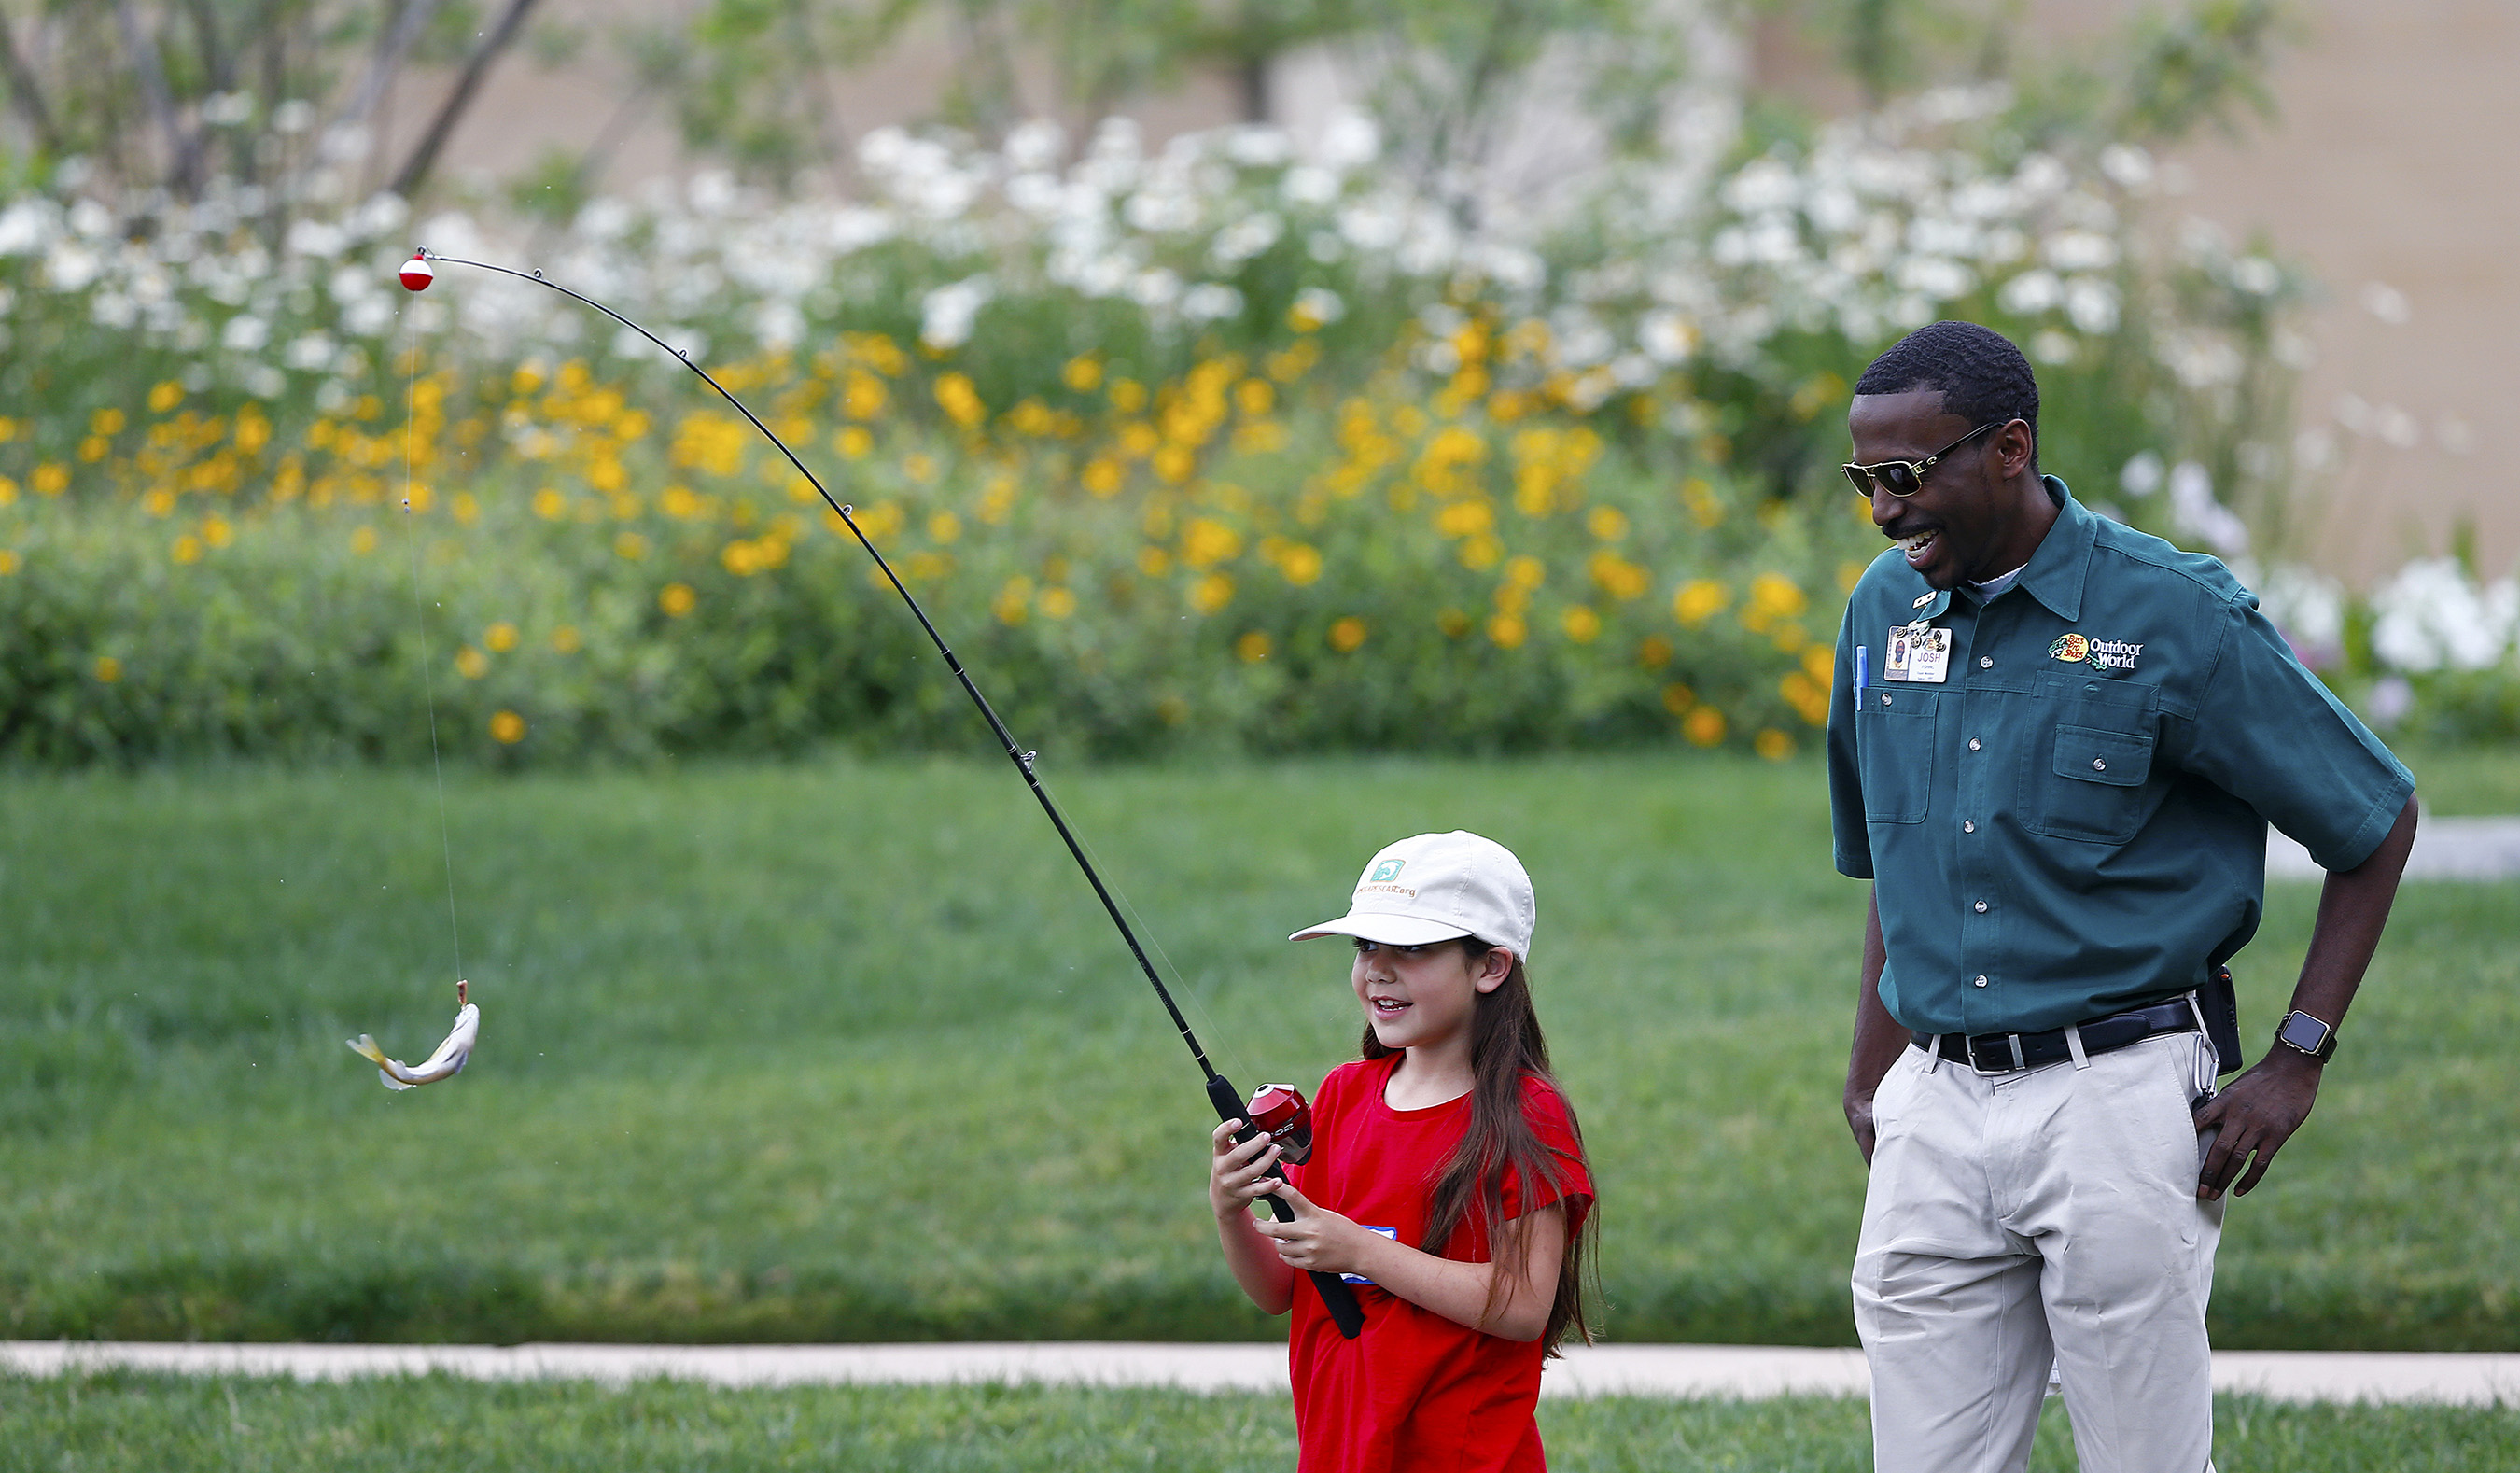 A child catches a fish during a Recreational Boating & Fishing Foundation (RBFF) event at the George Bush Presidential Library on Thursday, April 14, 2016, in College Station, Texas. RBFF is a nonprofit organization whose mission is to increase participation in recreational angling and boating, thereby protecting and restoring the nation’s aquatic natural resources. (Aaron M. Sprecher/AP Images for RBFF)